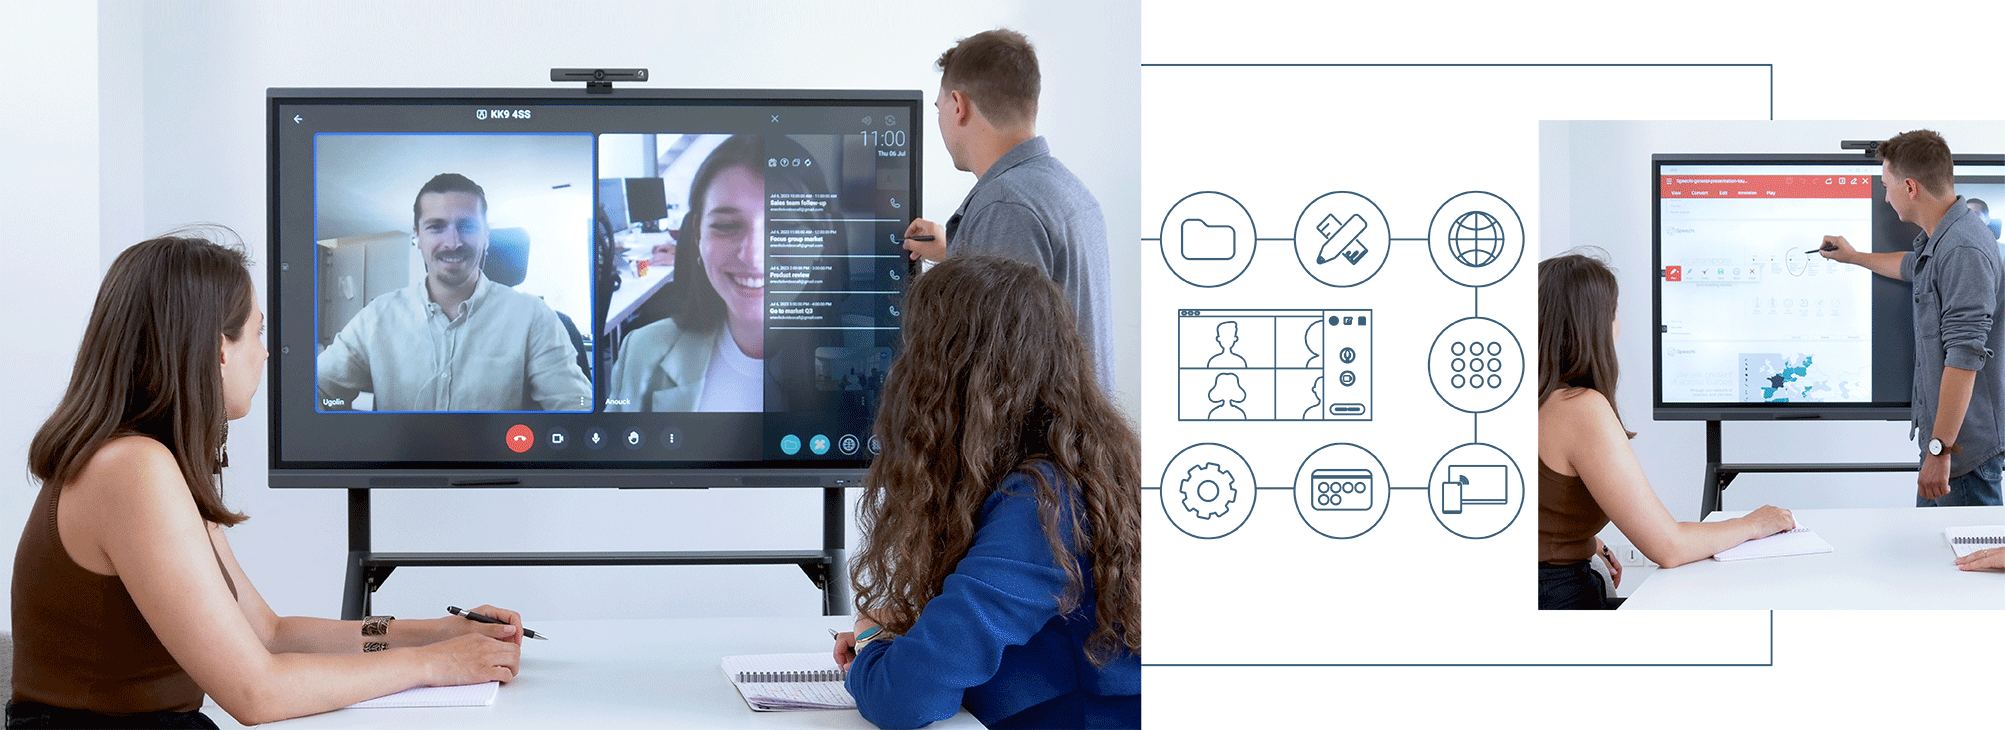 Whiteboard software for more engaging virtual communication.